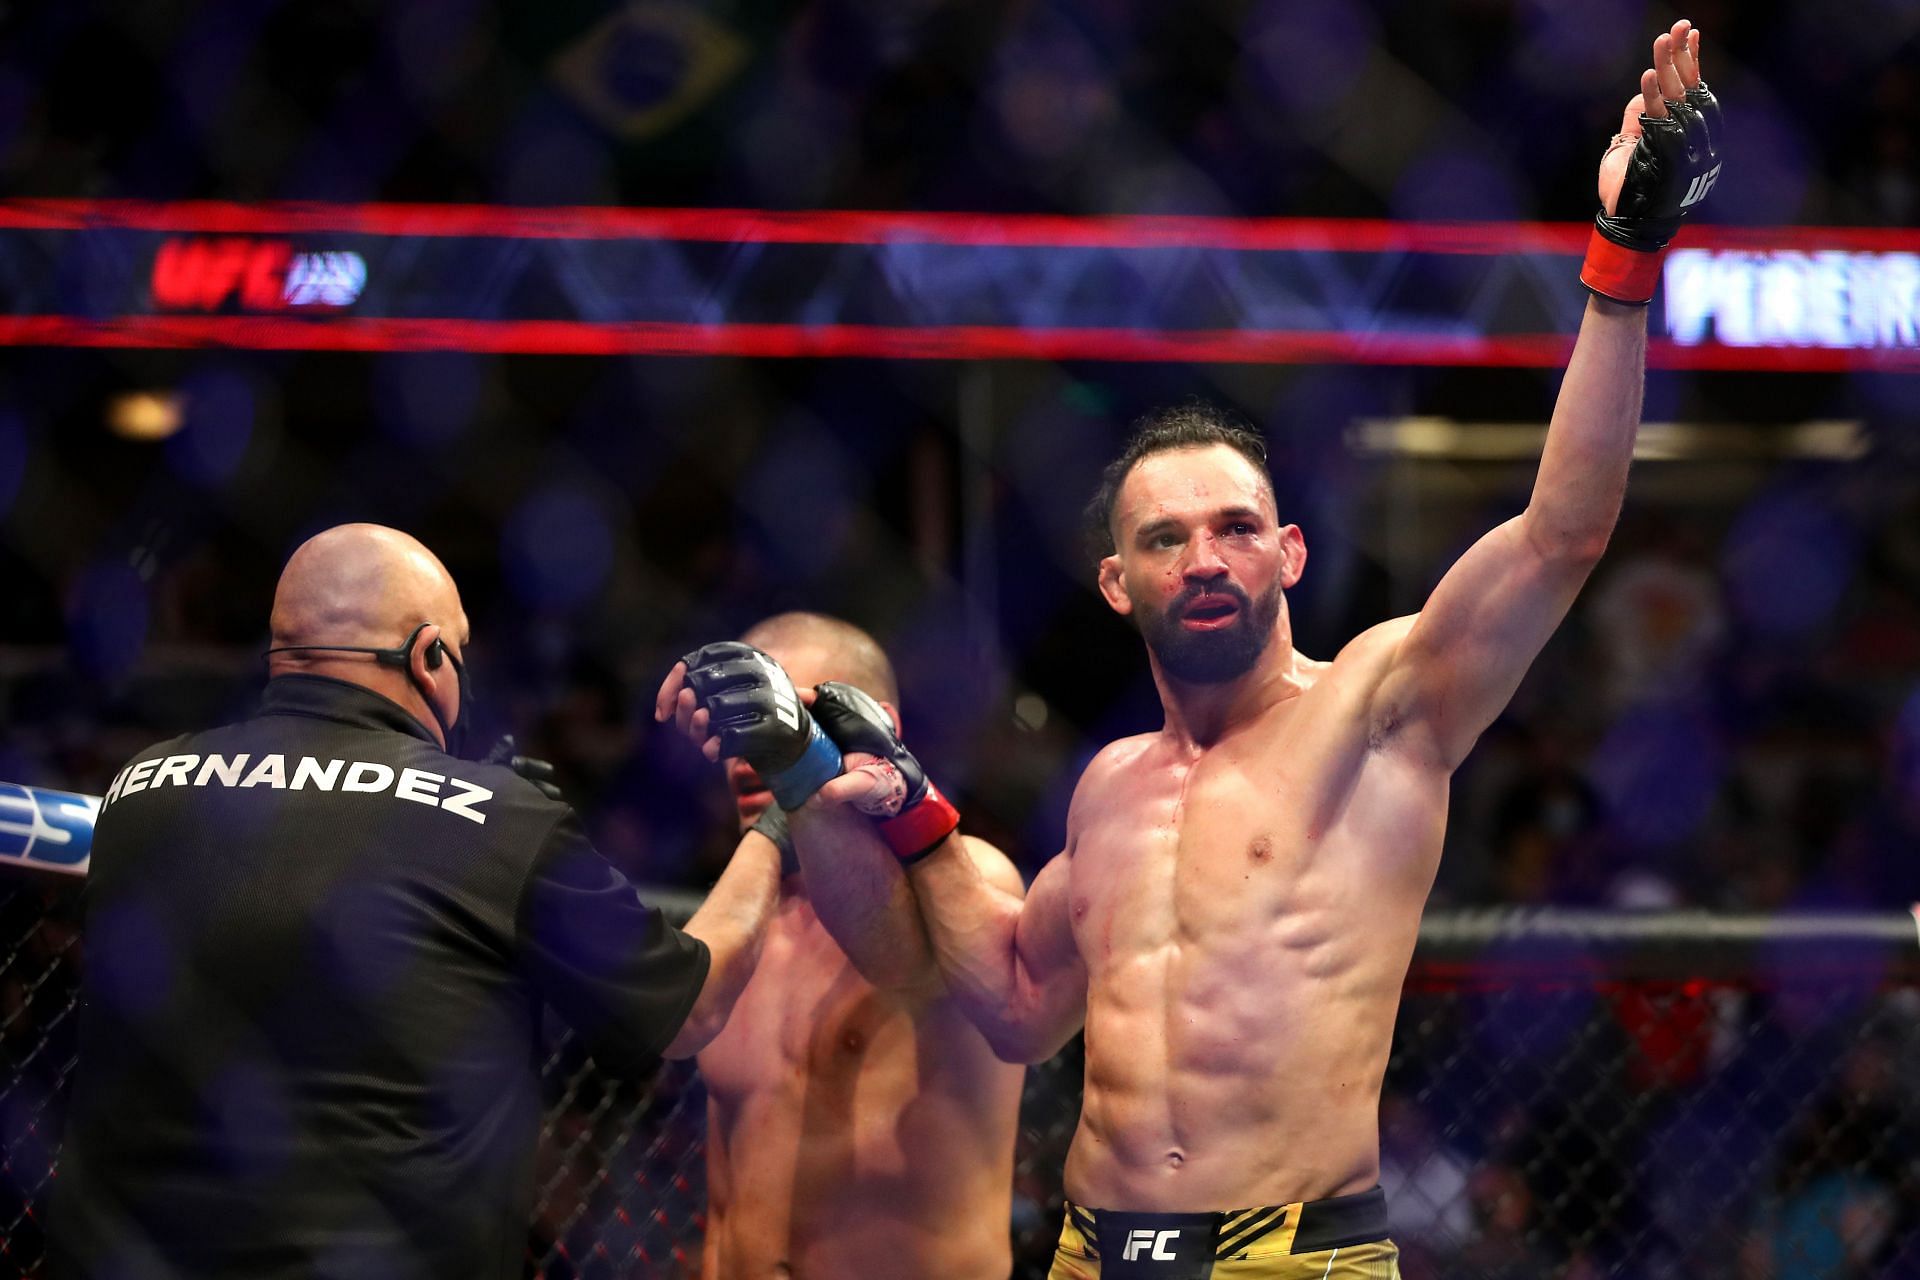 Michel Pereira has tuned up his game and now looks like a legitimate contender at welterweight